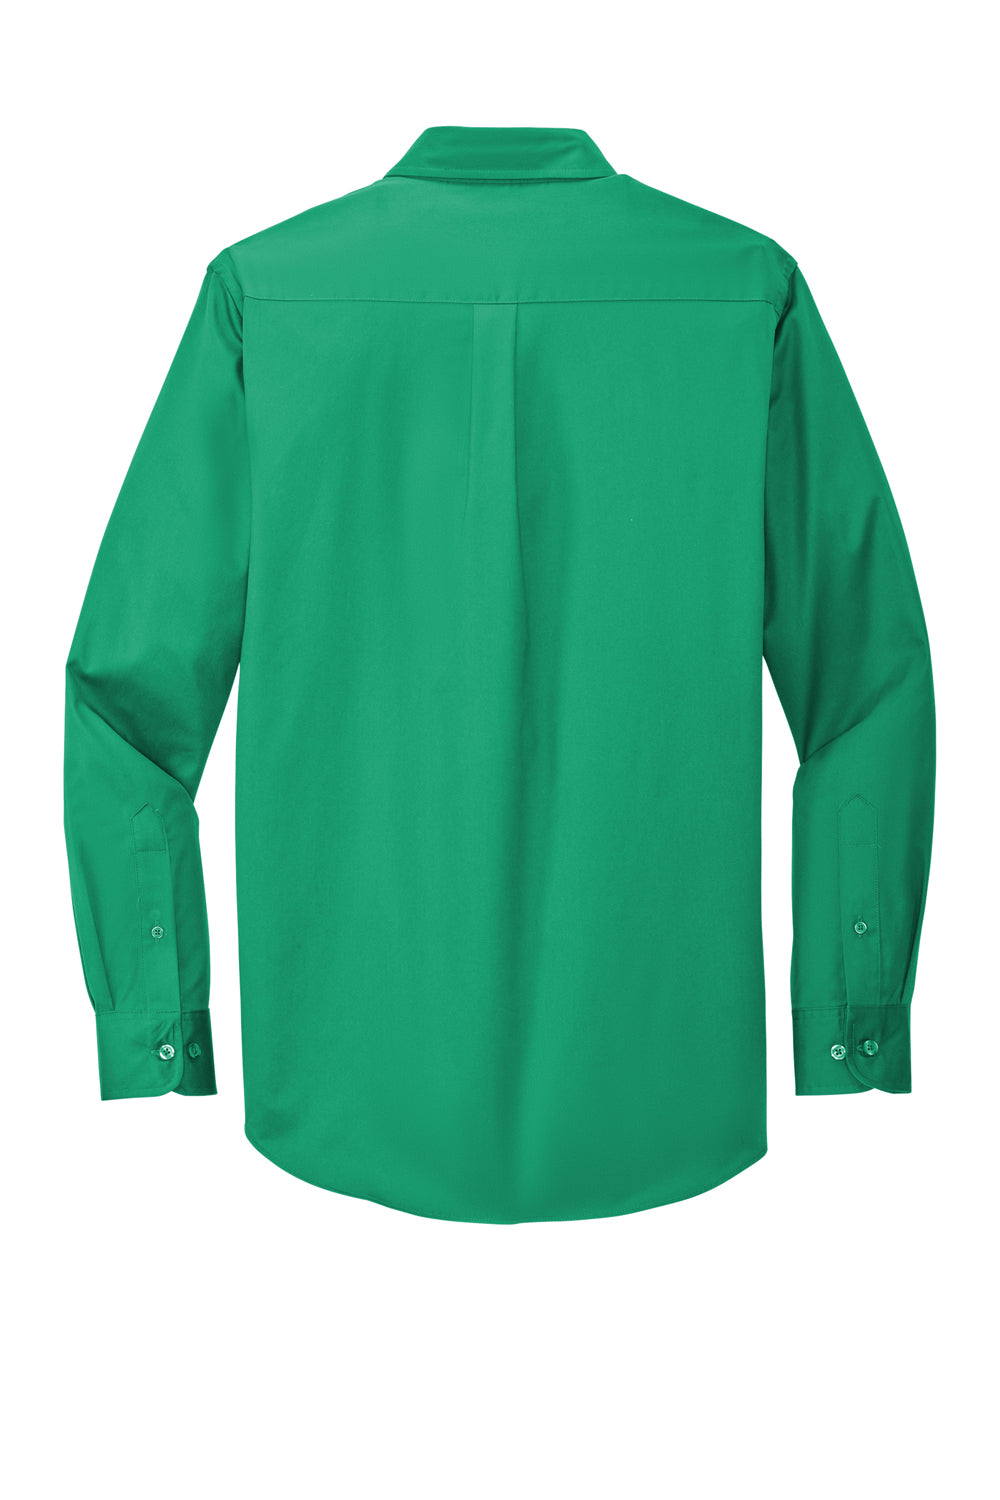 Port Authority S608/TLS608/S608ES Mens Easy Care Wrinkle Resistant Long Sleeve Button Down Shirt w/ Pocket Court Green Flat Back